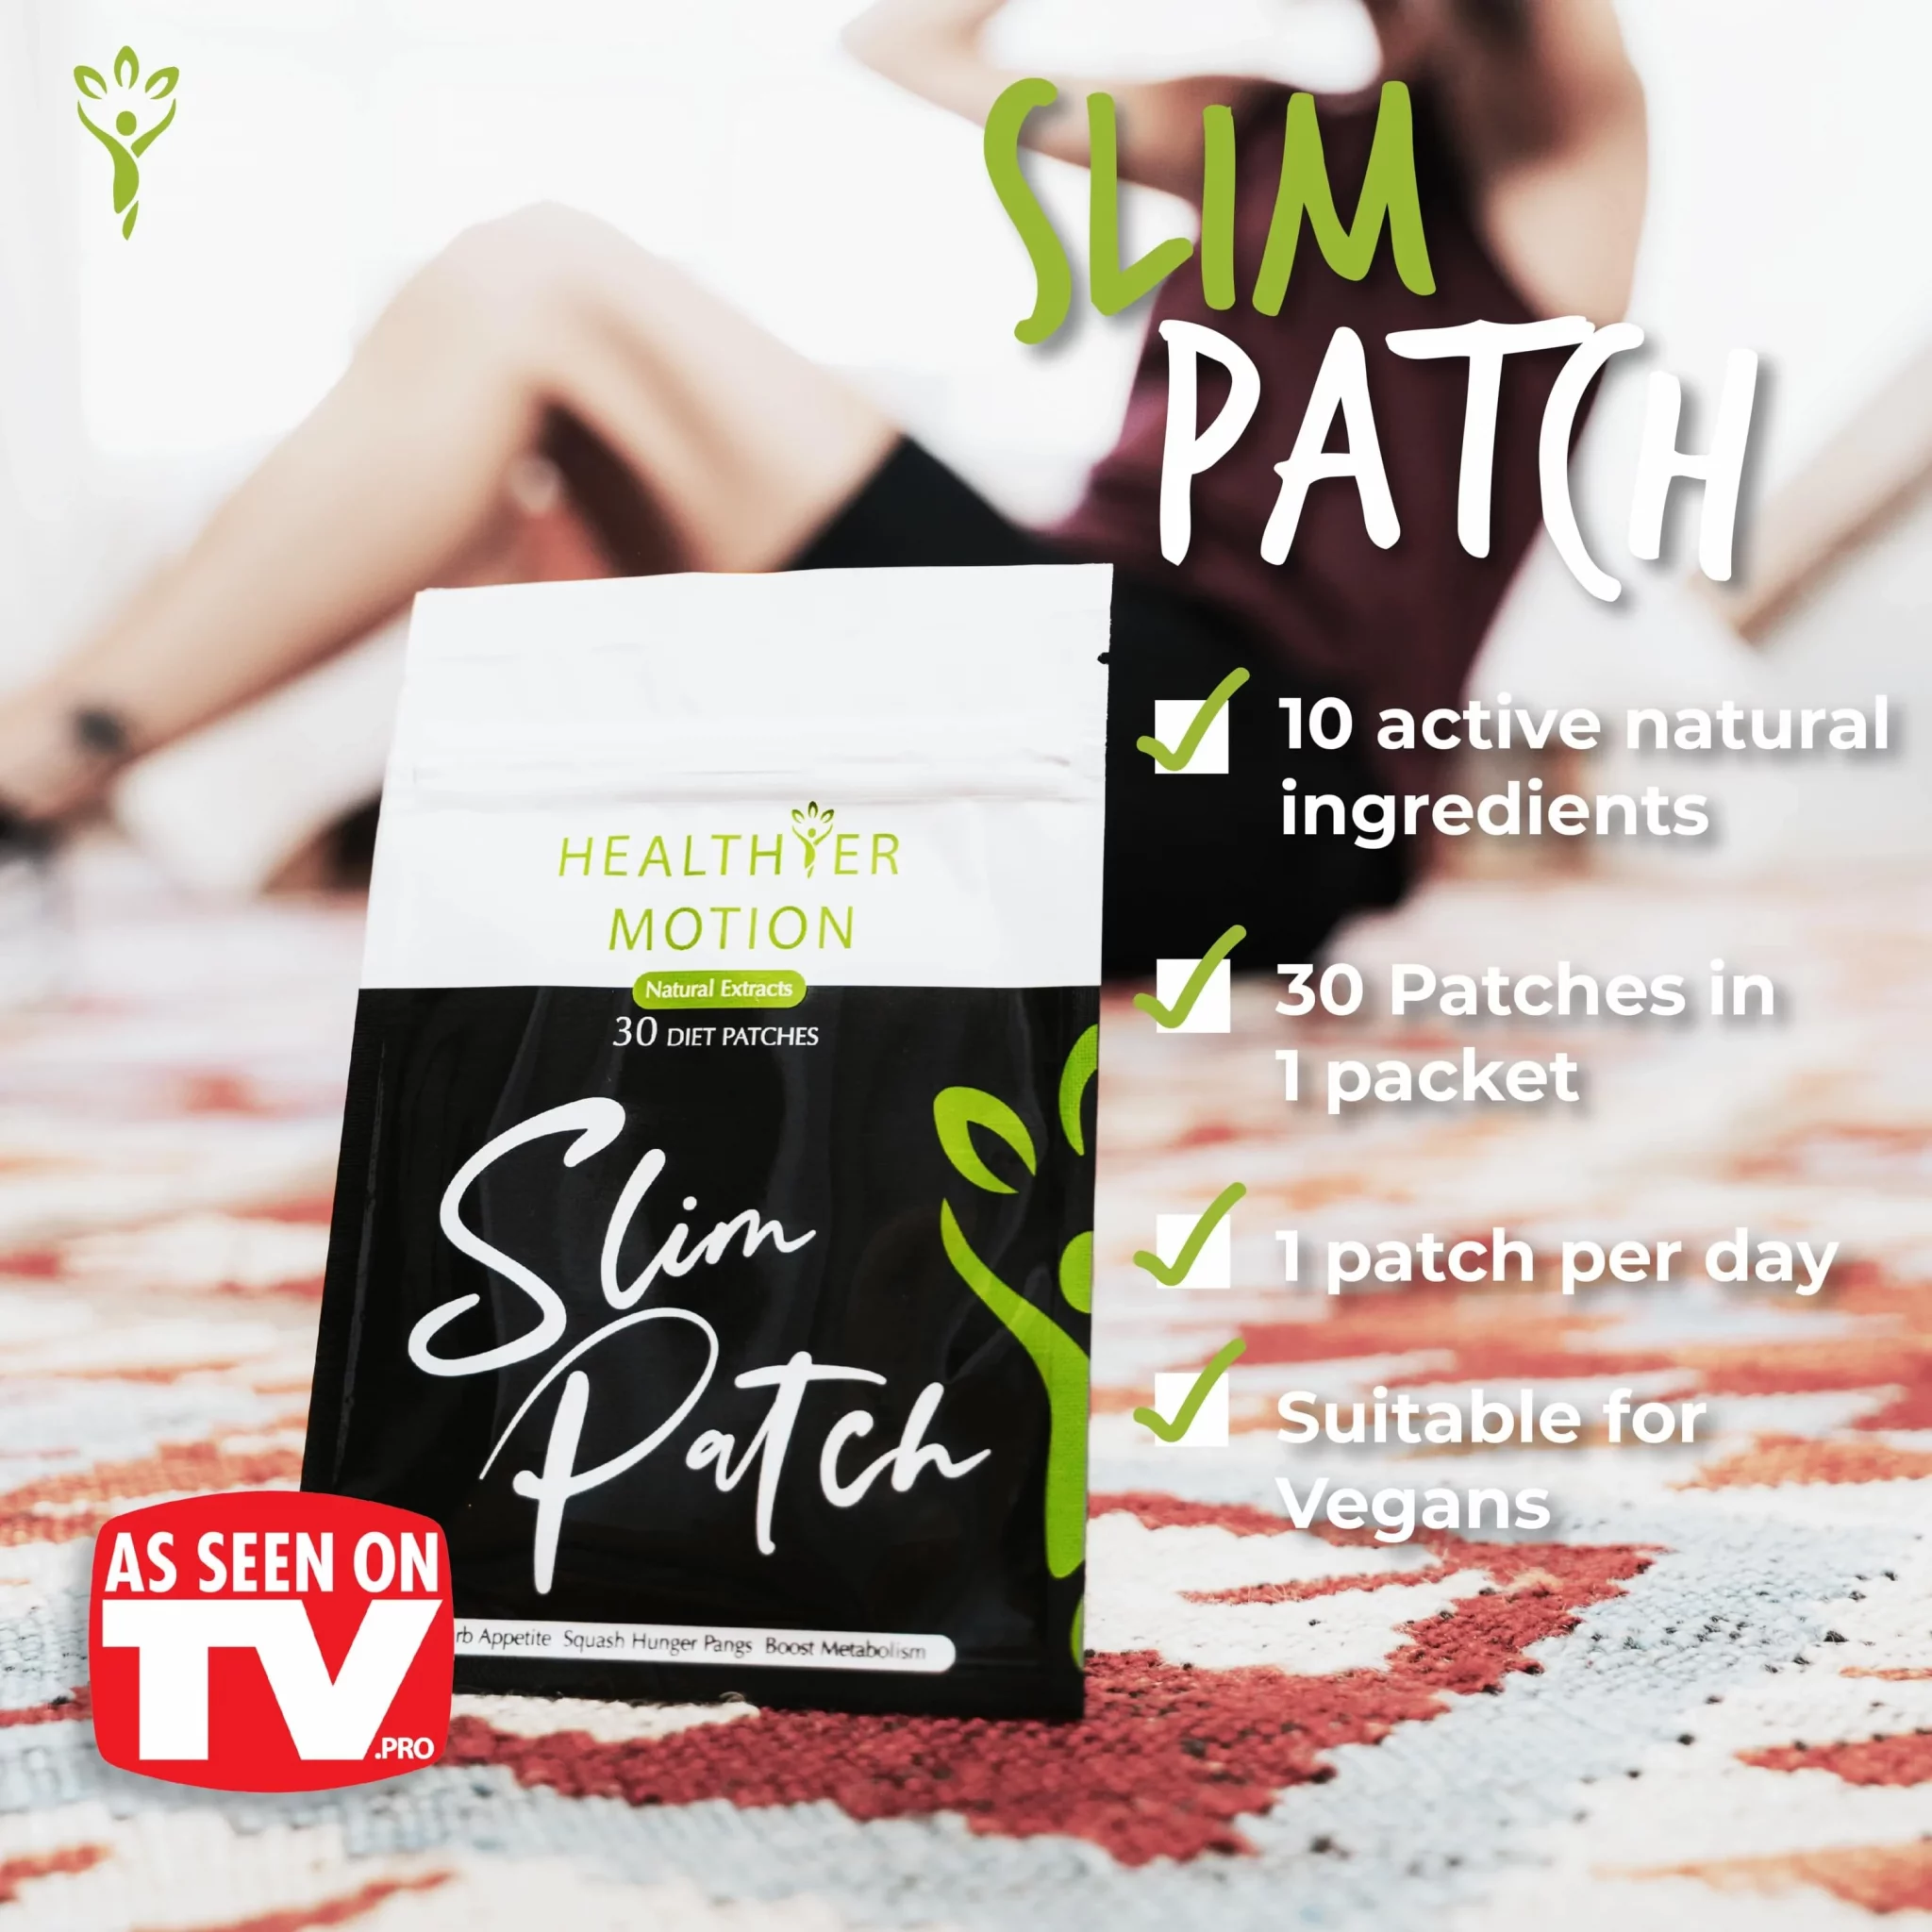 Healthier Motion Slim Patch Review